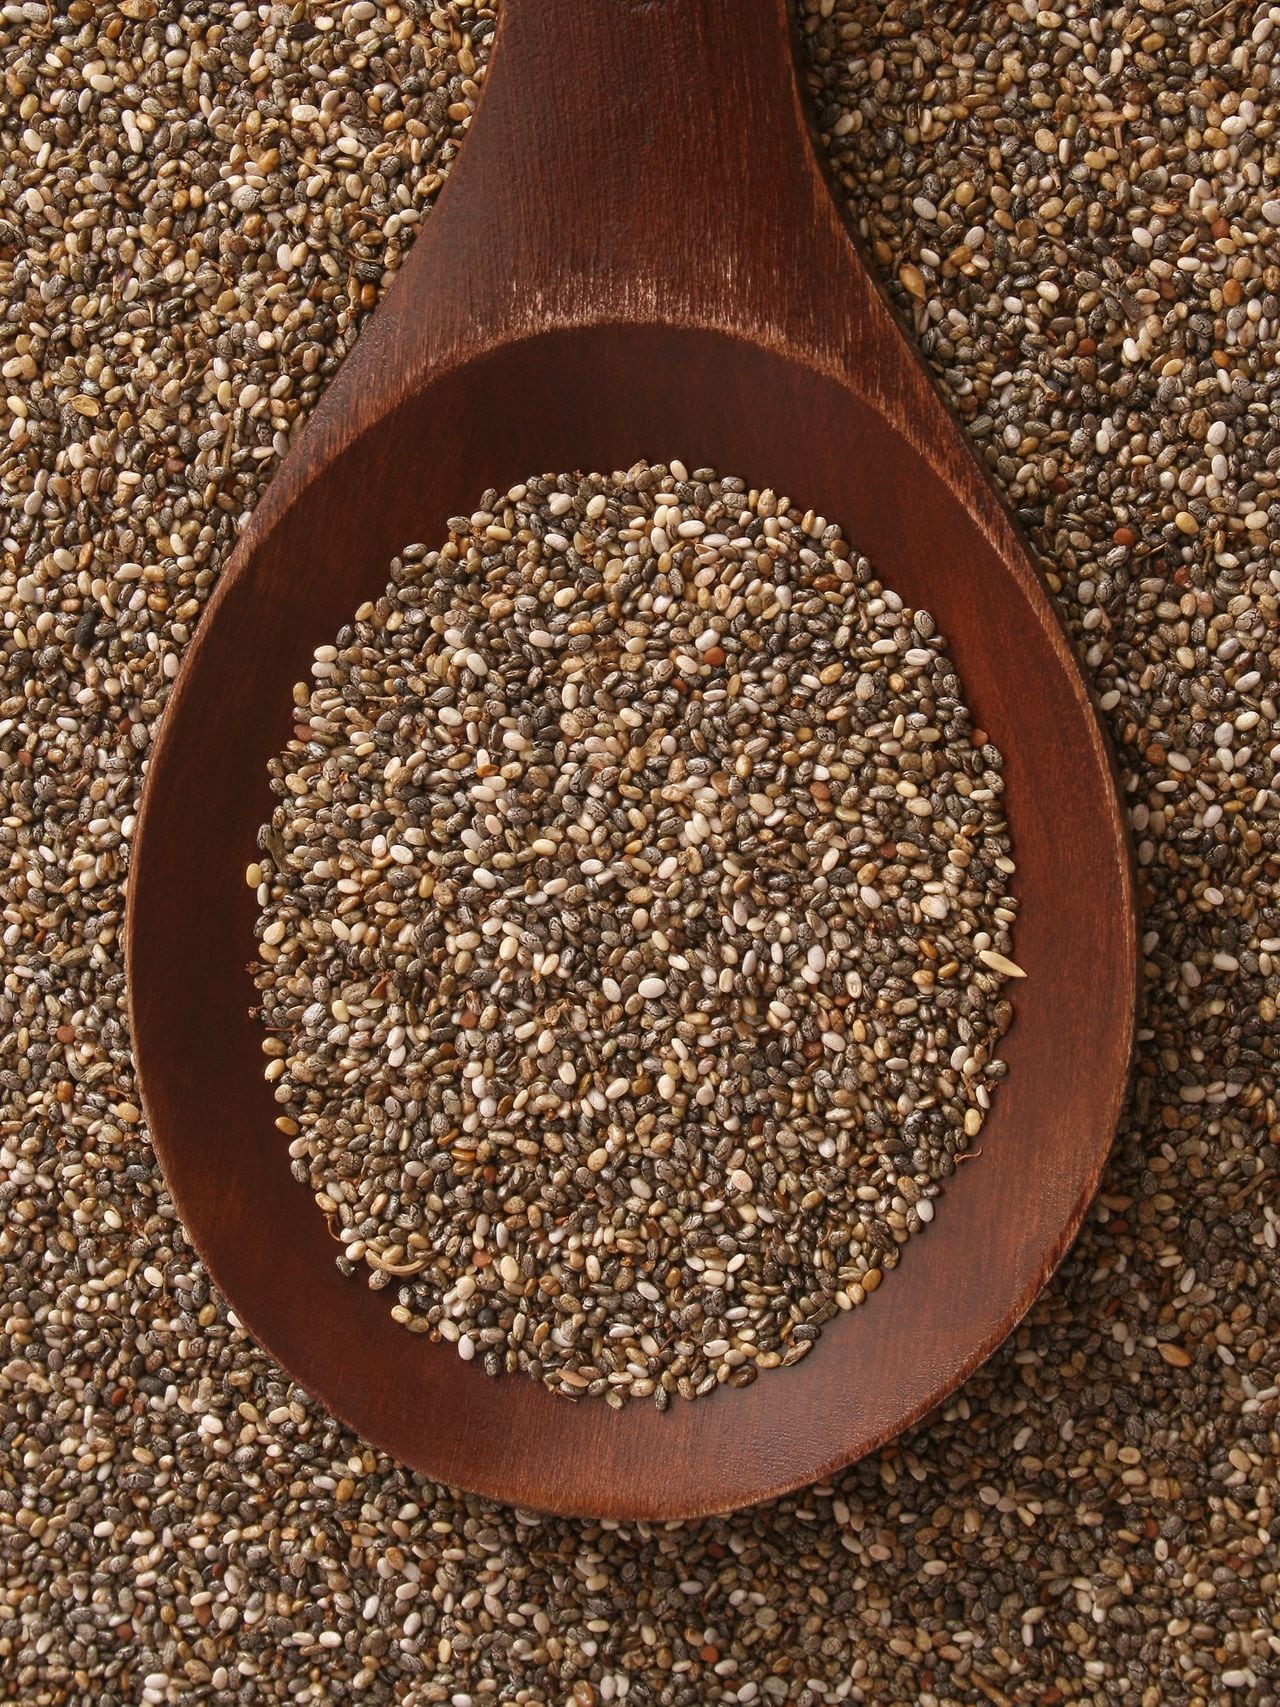 Top view of wooden spoon with chia seeds on it